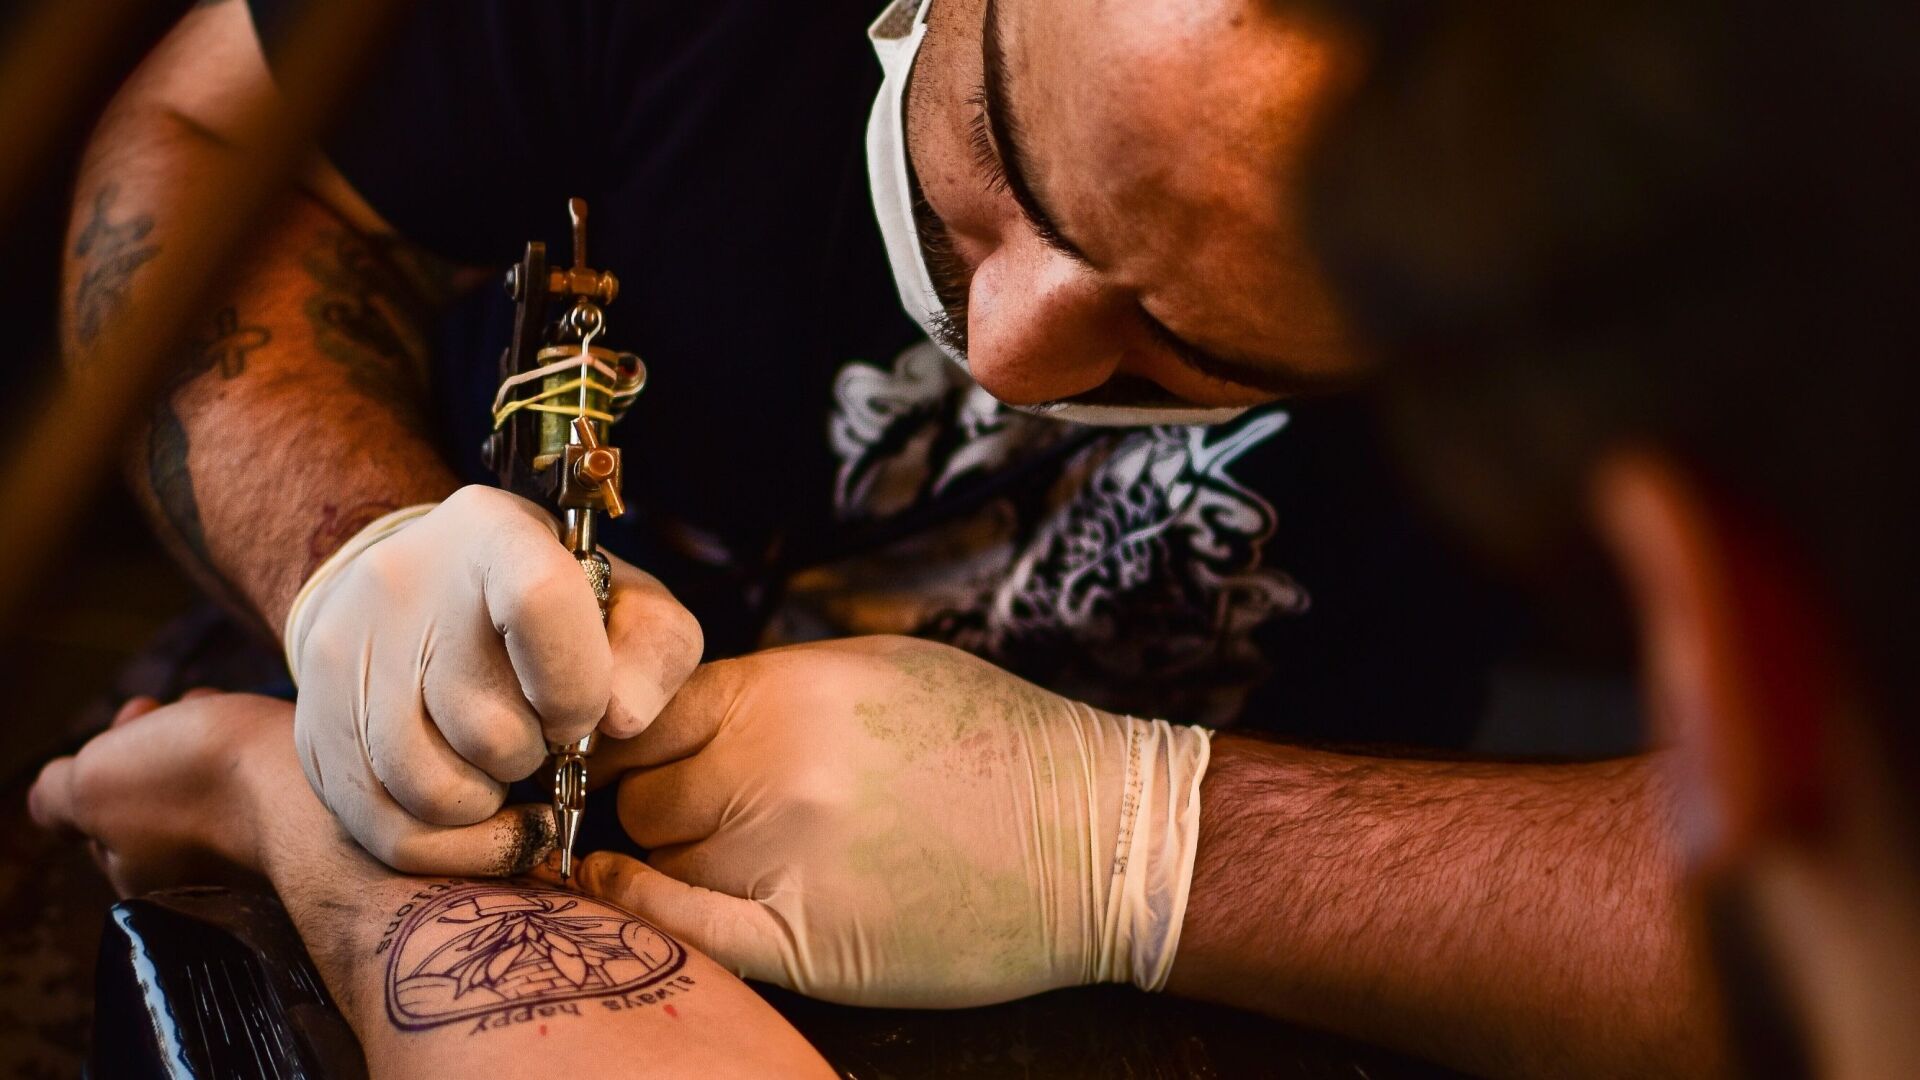 Who are the Best Washington Tattoo Artists  Top Shops Near Me